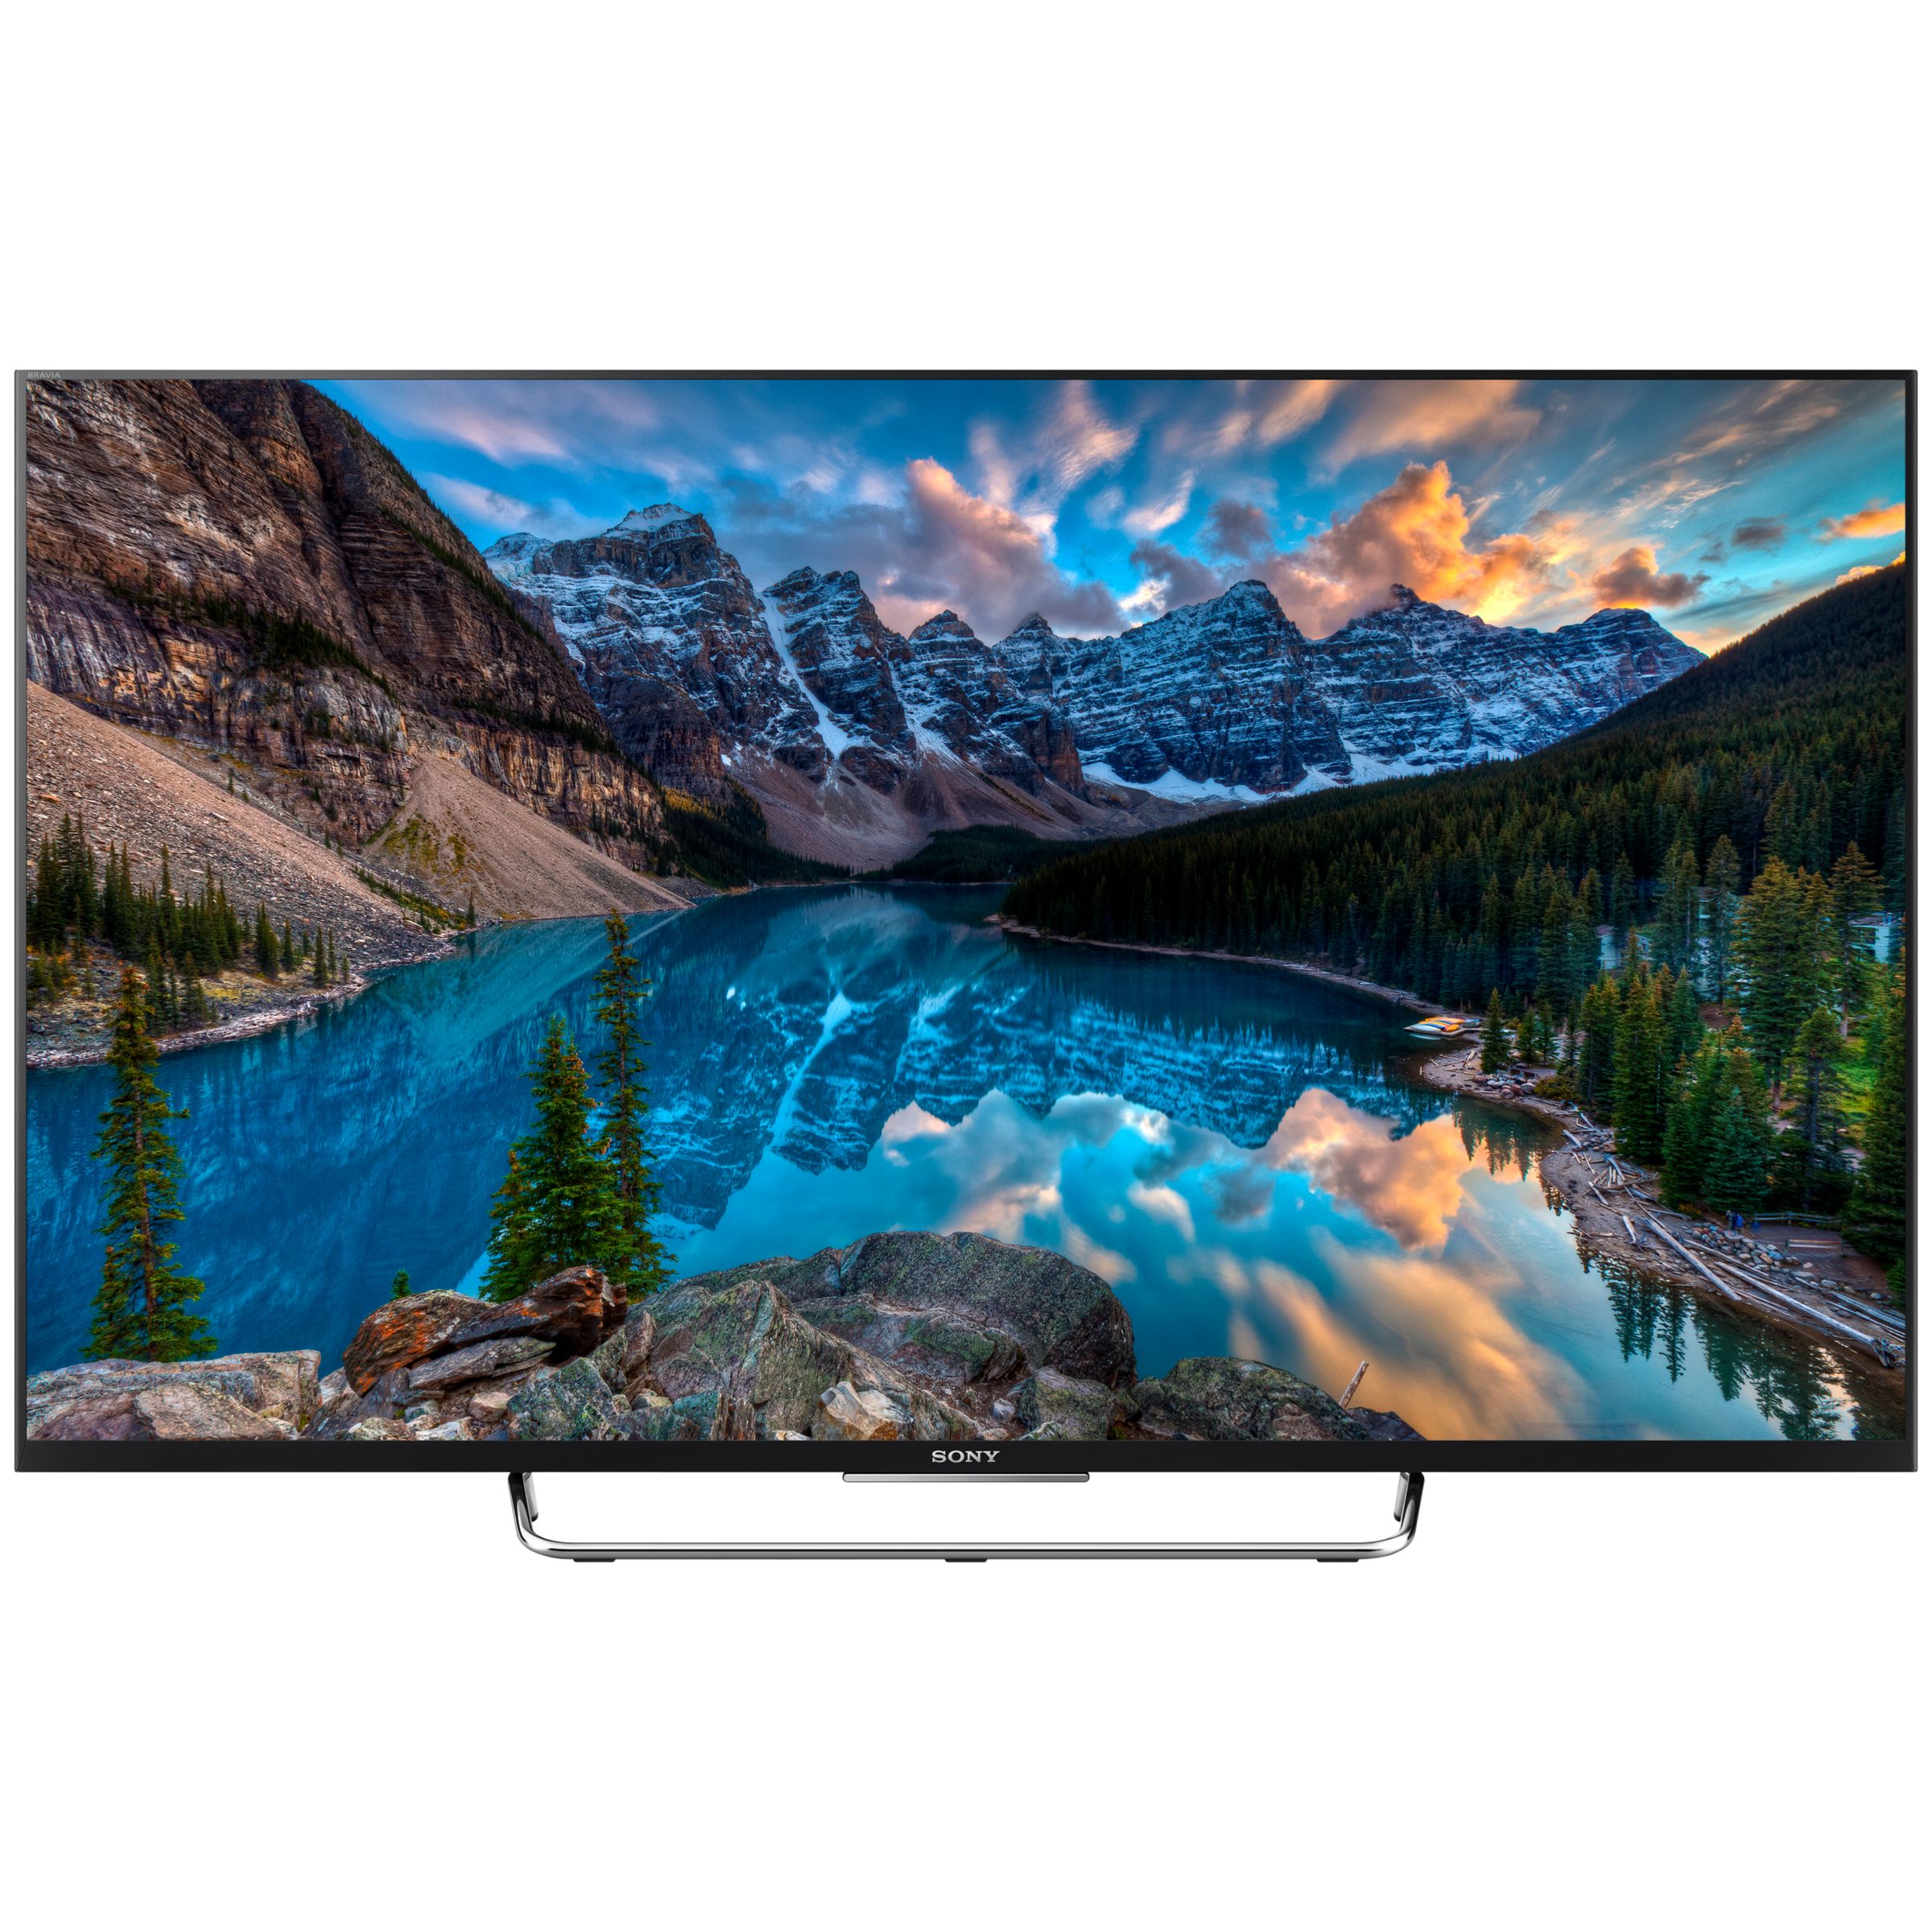 Sony Bravia KDL55W80 LED HD 1080p 3D Android TV, 55